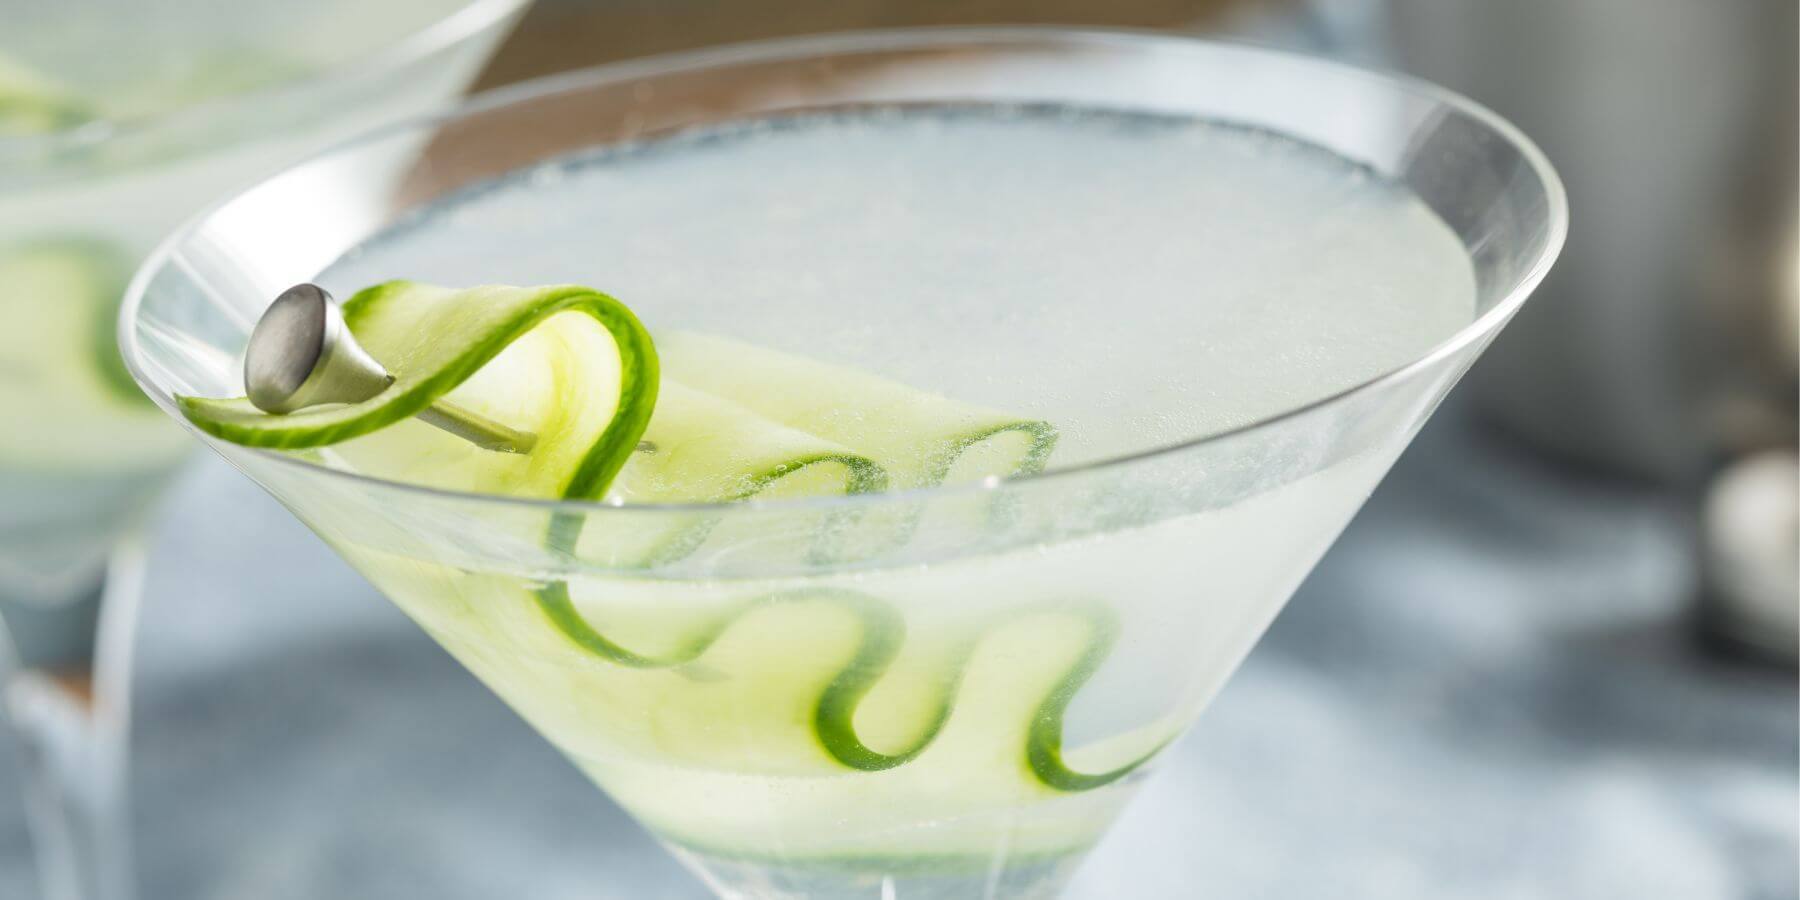 How to Make a Cucumber Martini - The Mixer Recipes